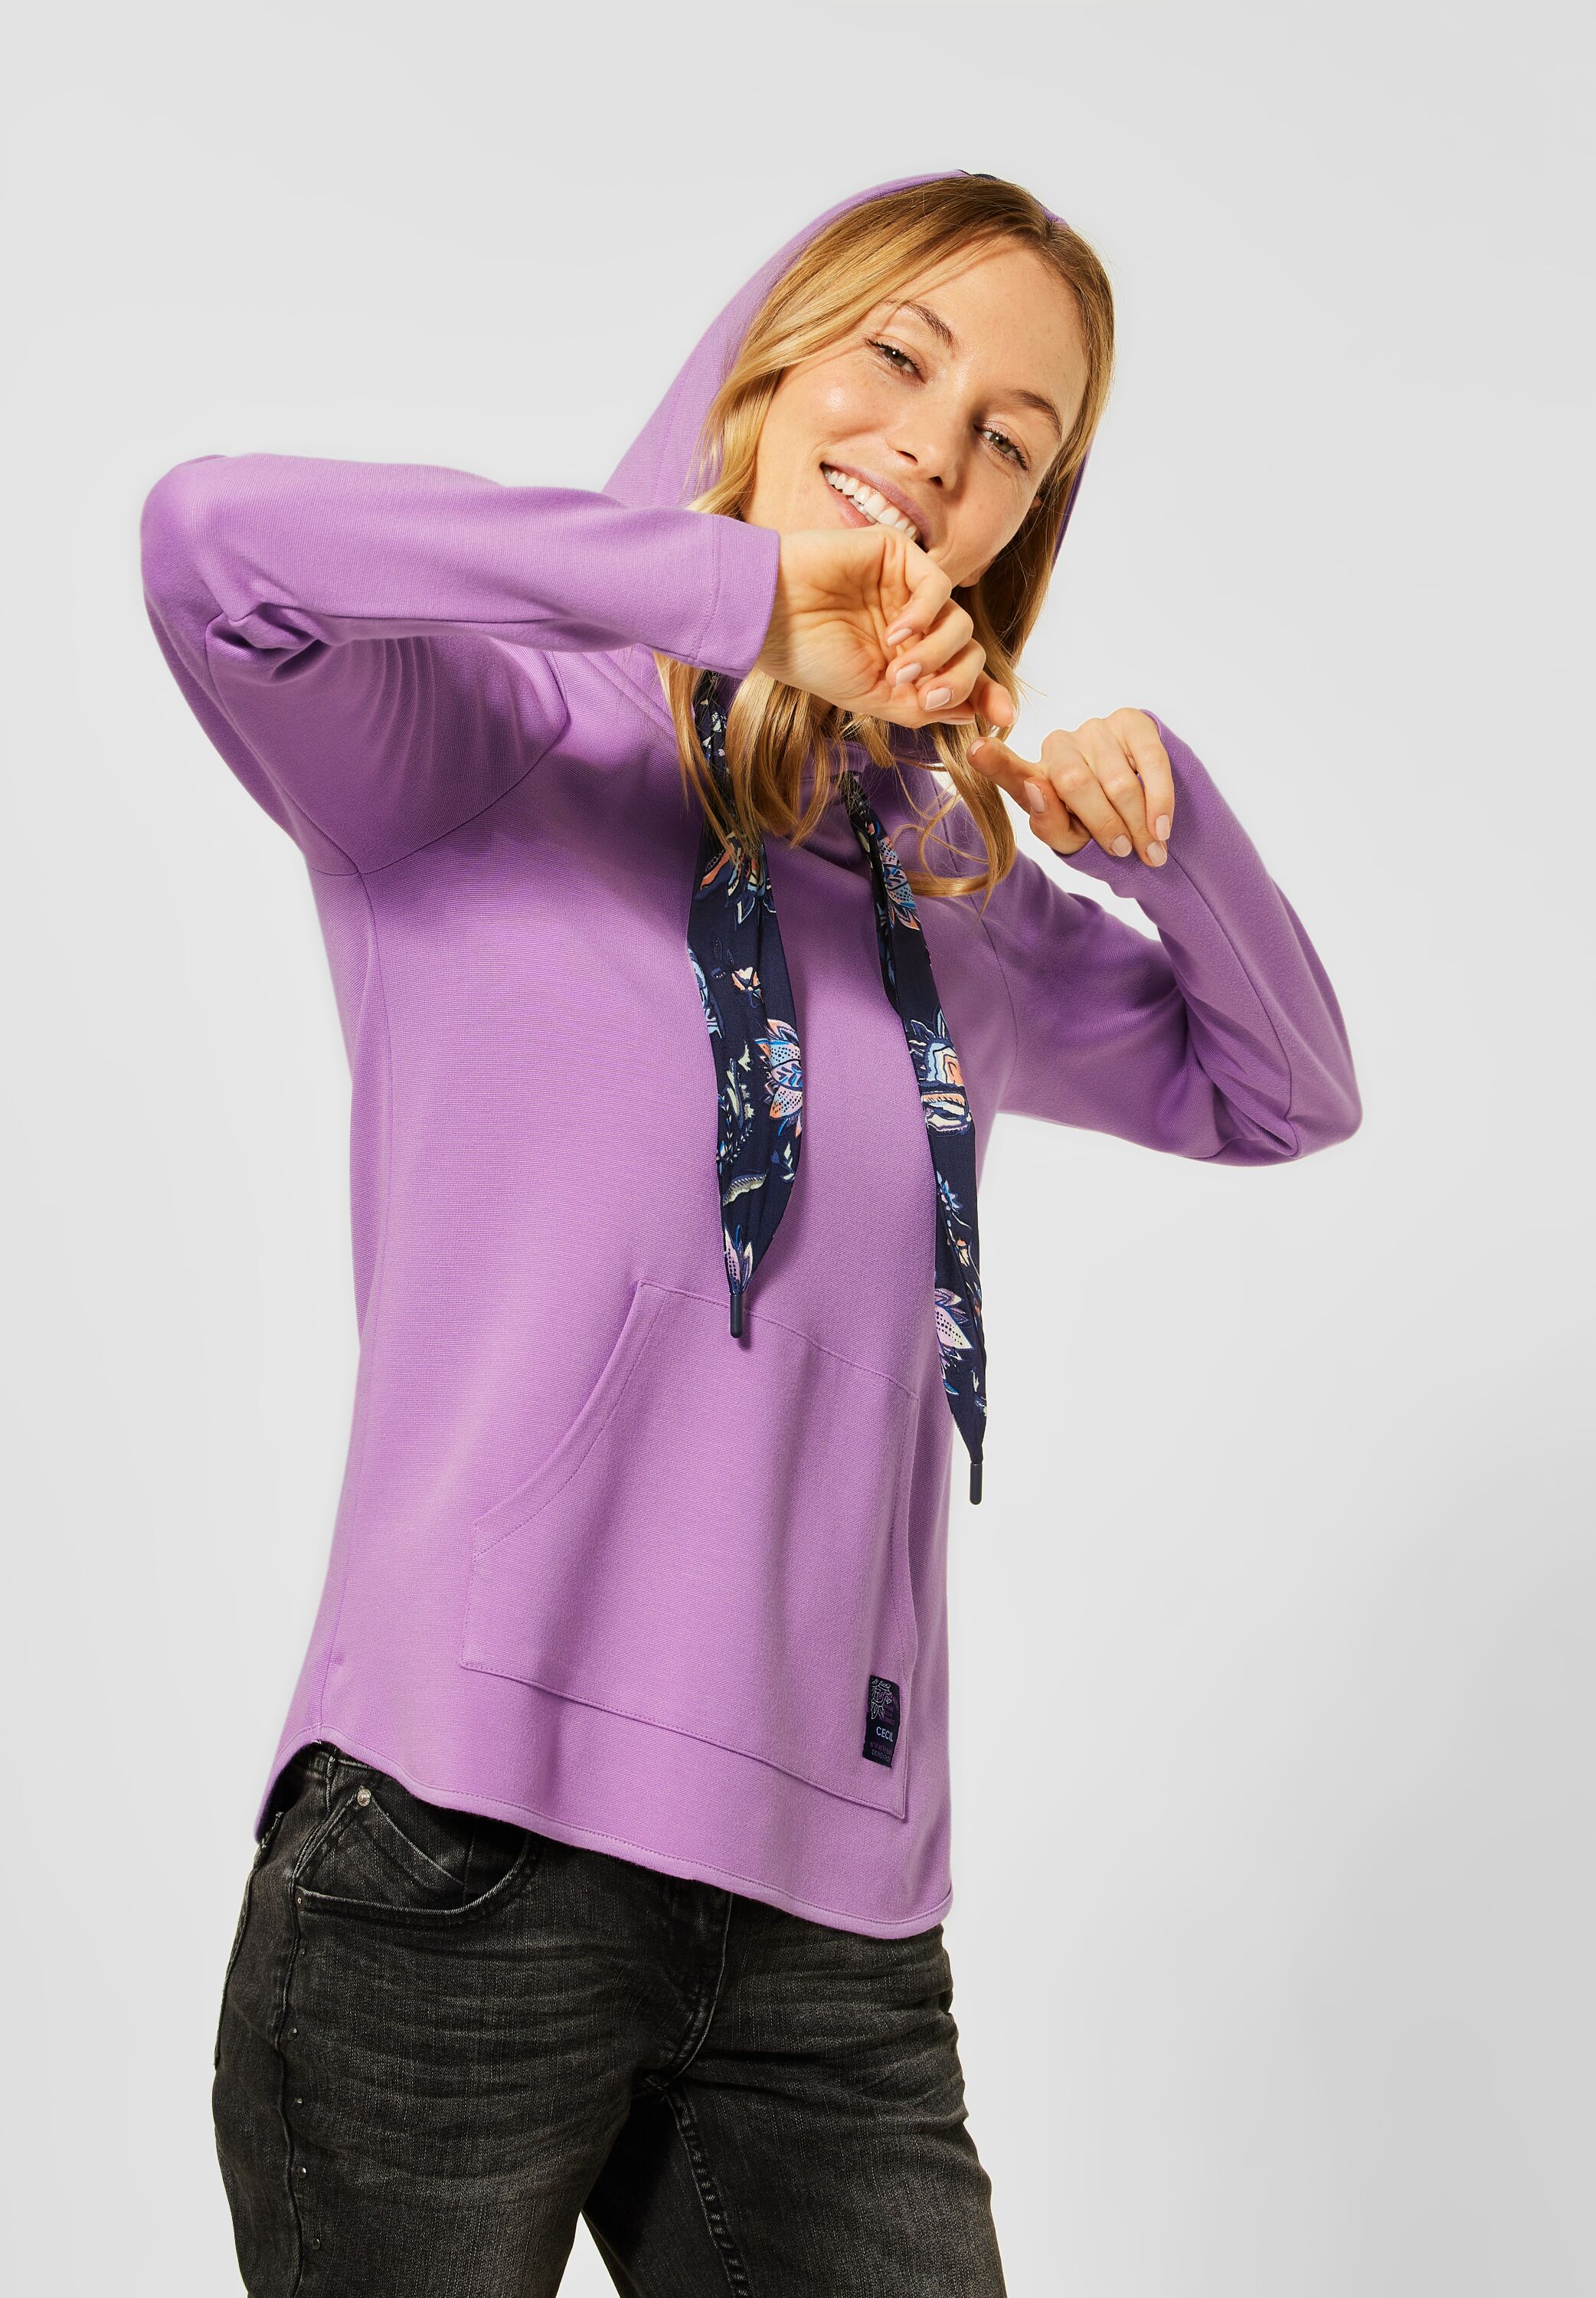 Mode Shirt Violet Soft - B315803-12746 CECIL CONCEPT in